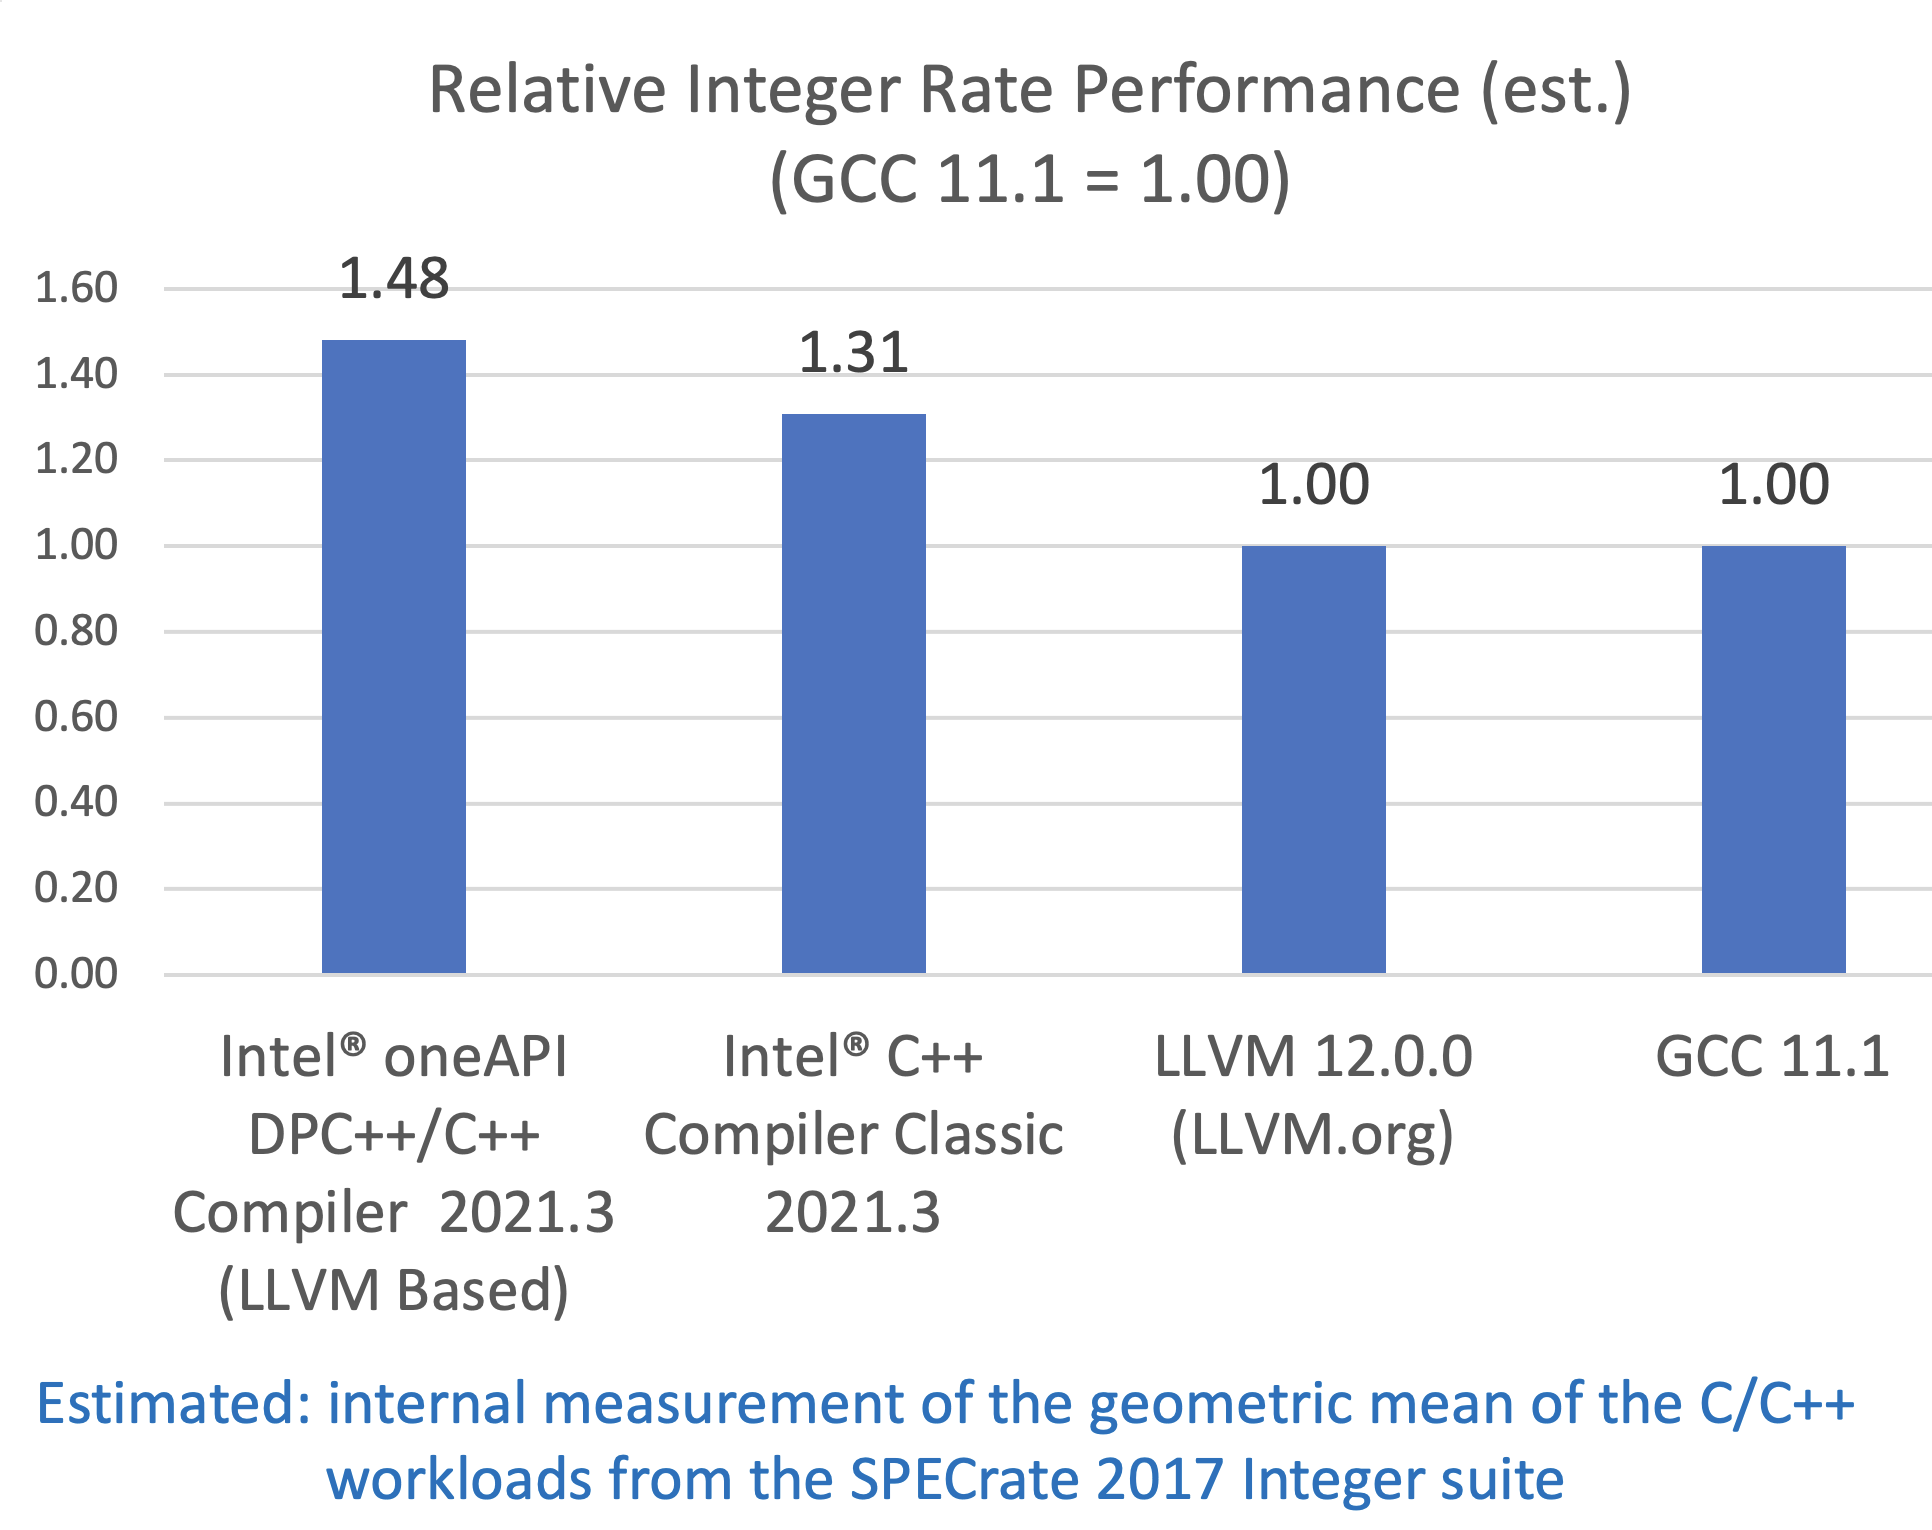 SPECrate 2017 INT (Estimated) Performance advantage relative to other compilers on Intel® Xeon Platinum 8380 Processor